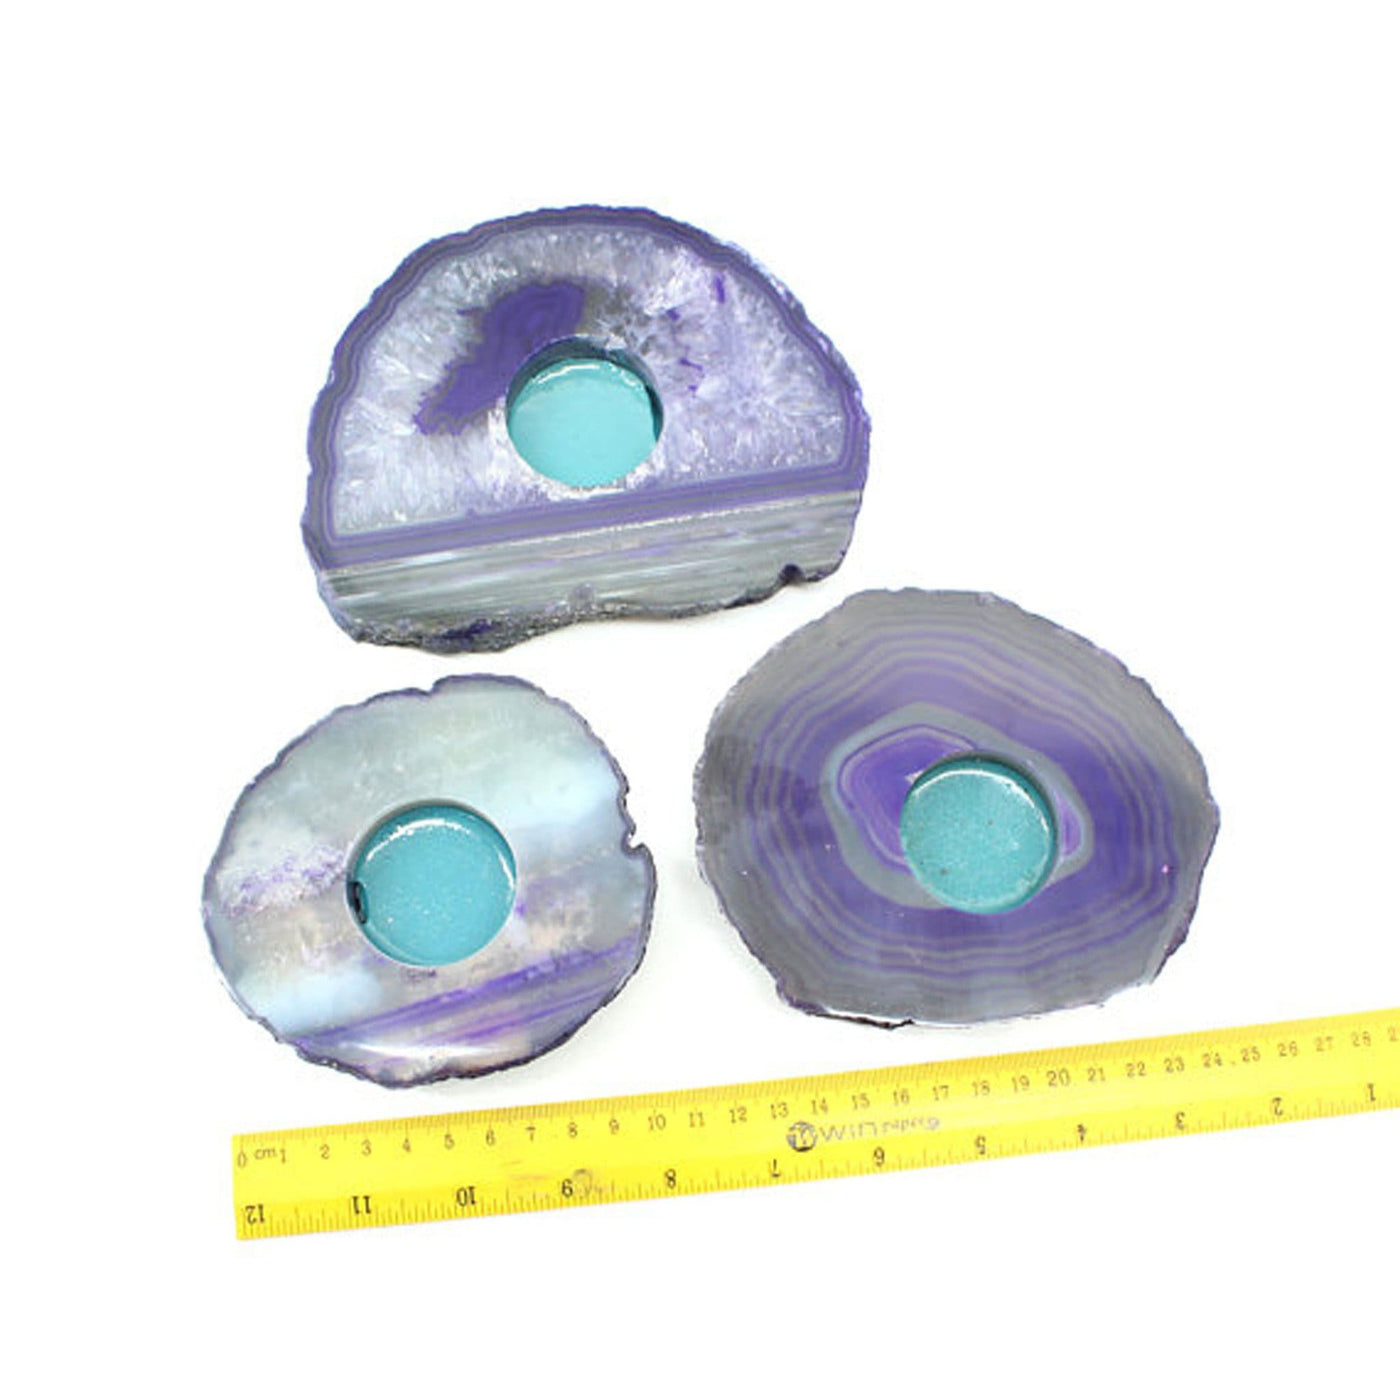 agate slab candle holders next to a ruler for size reference